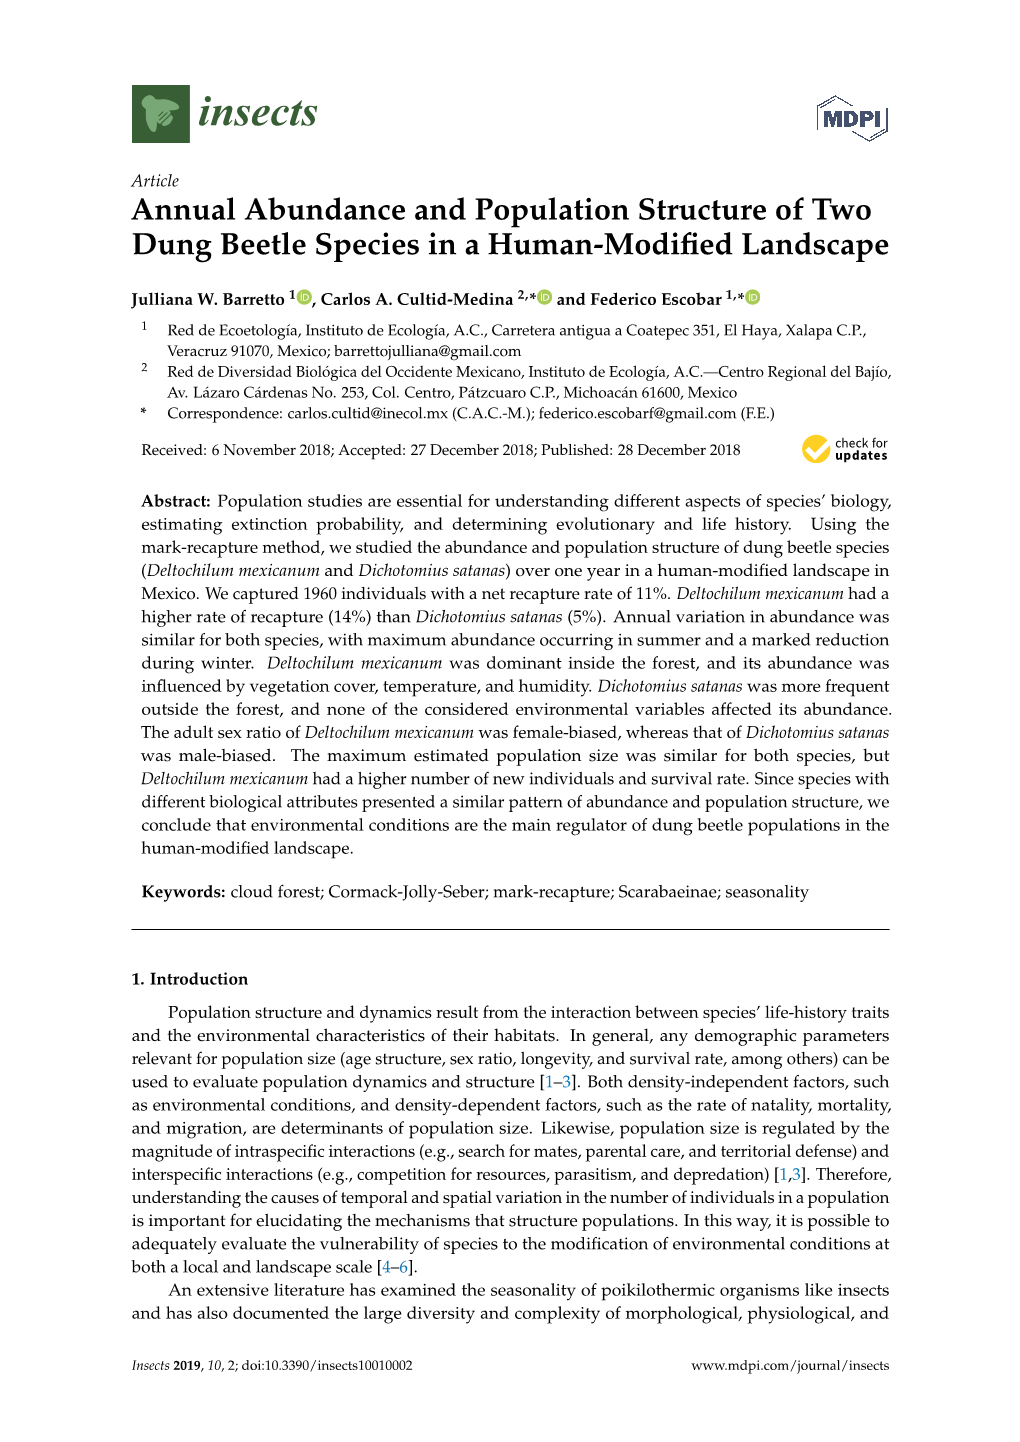 Annual Abundance and Population Structure of Two Dung Beetle Species in a Human-Modiﬁed Landscape